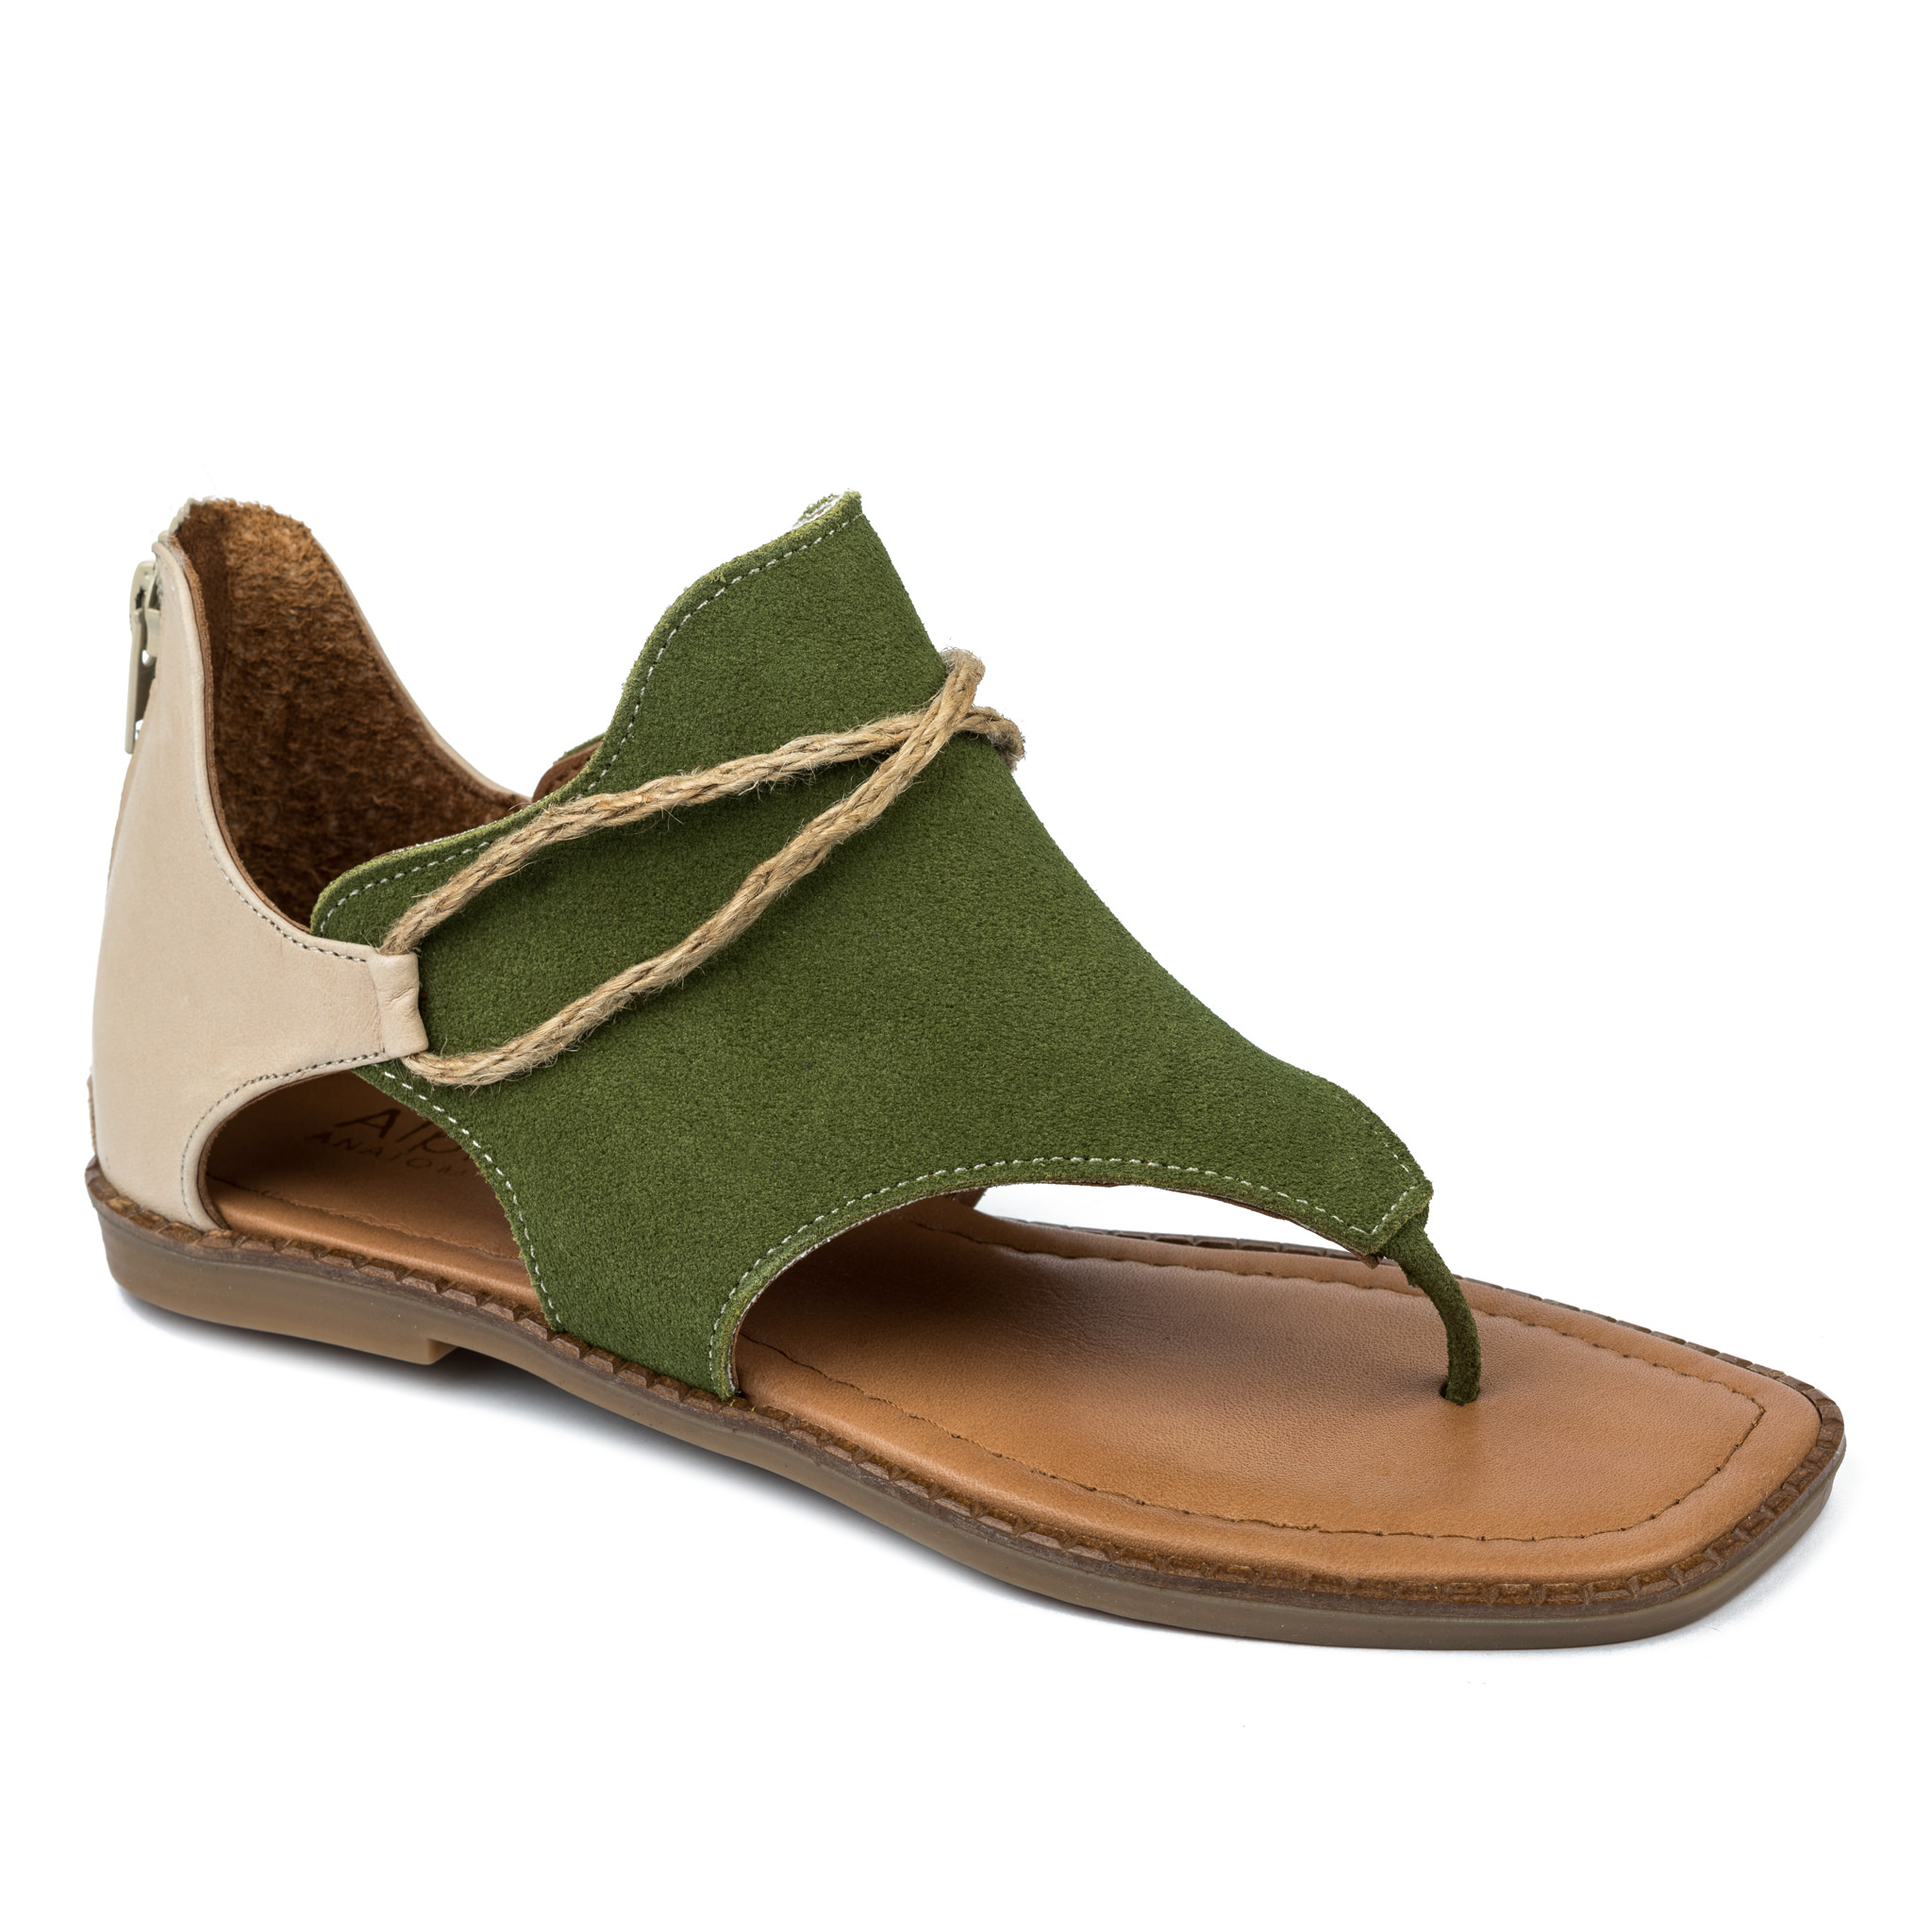 Leather sandals A643 - GREEN